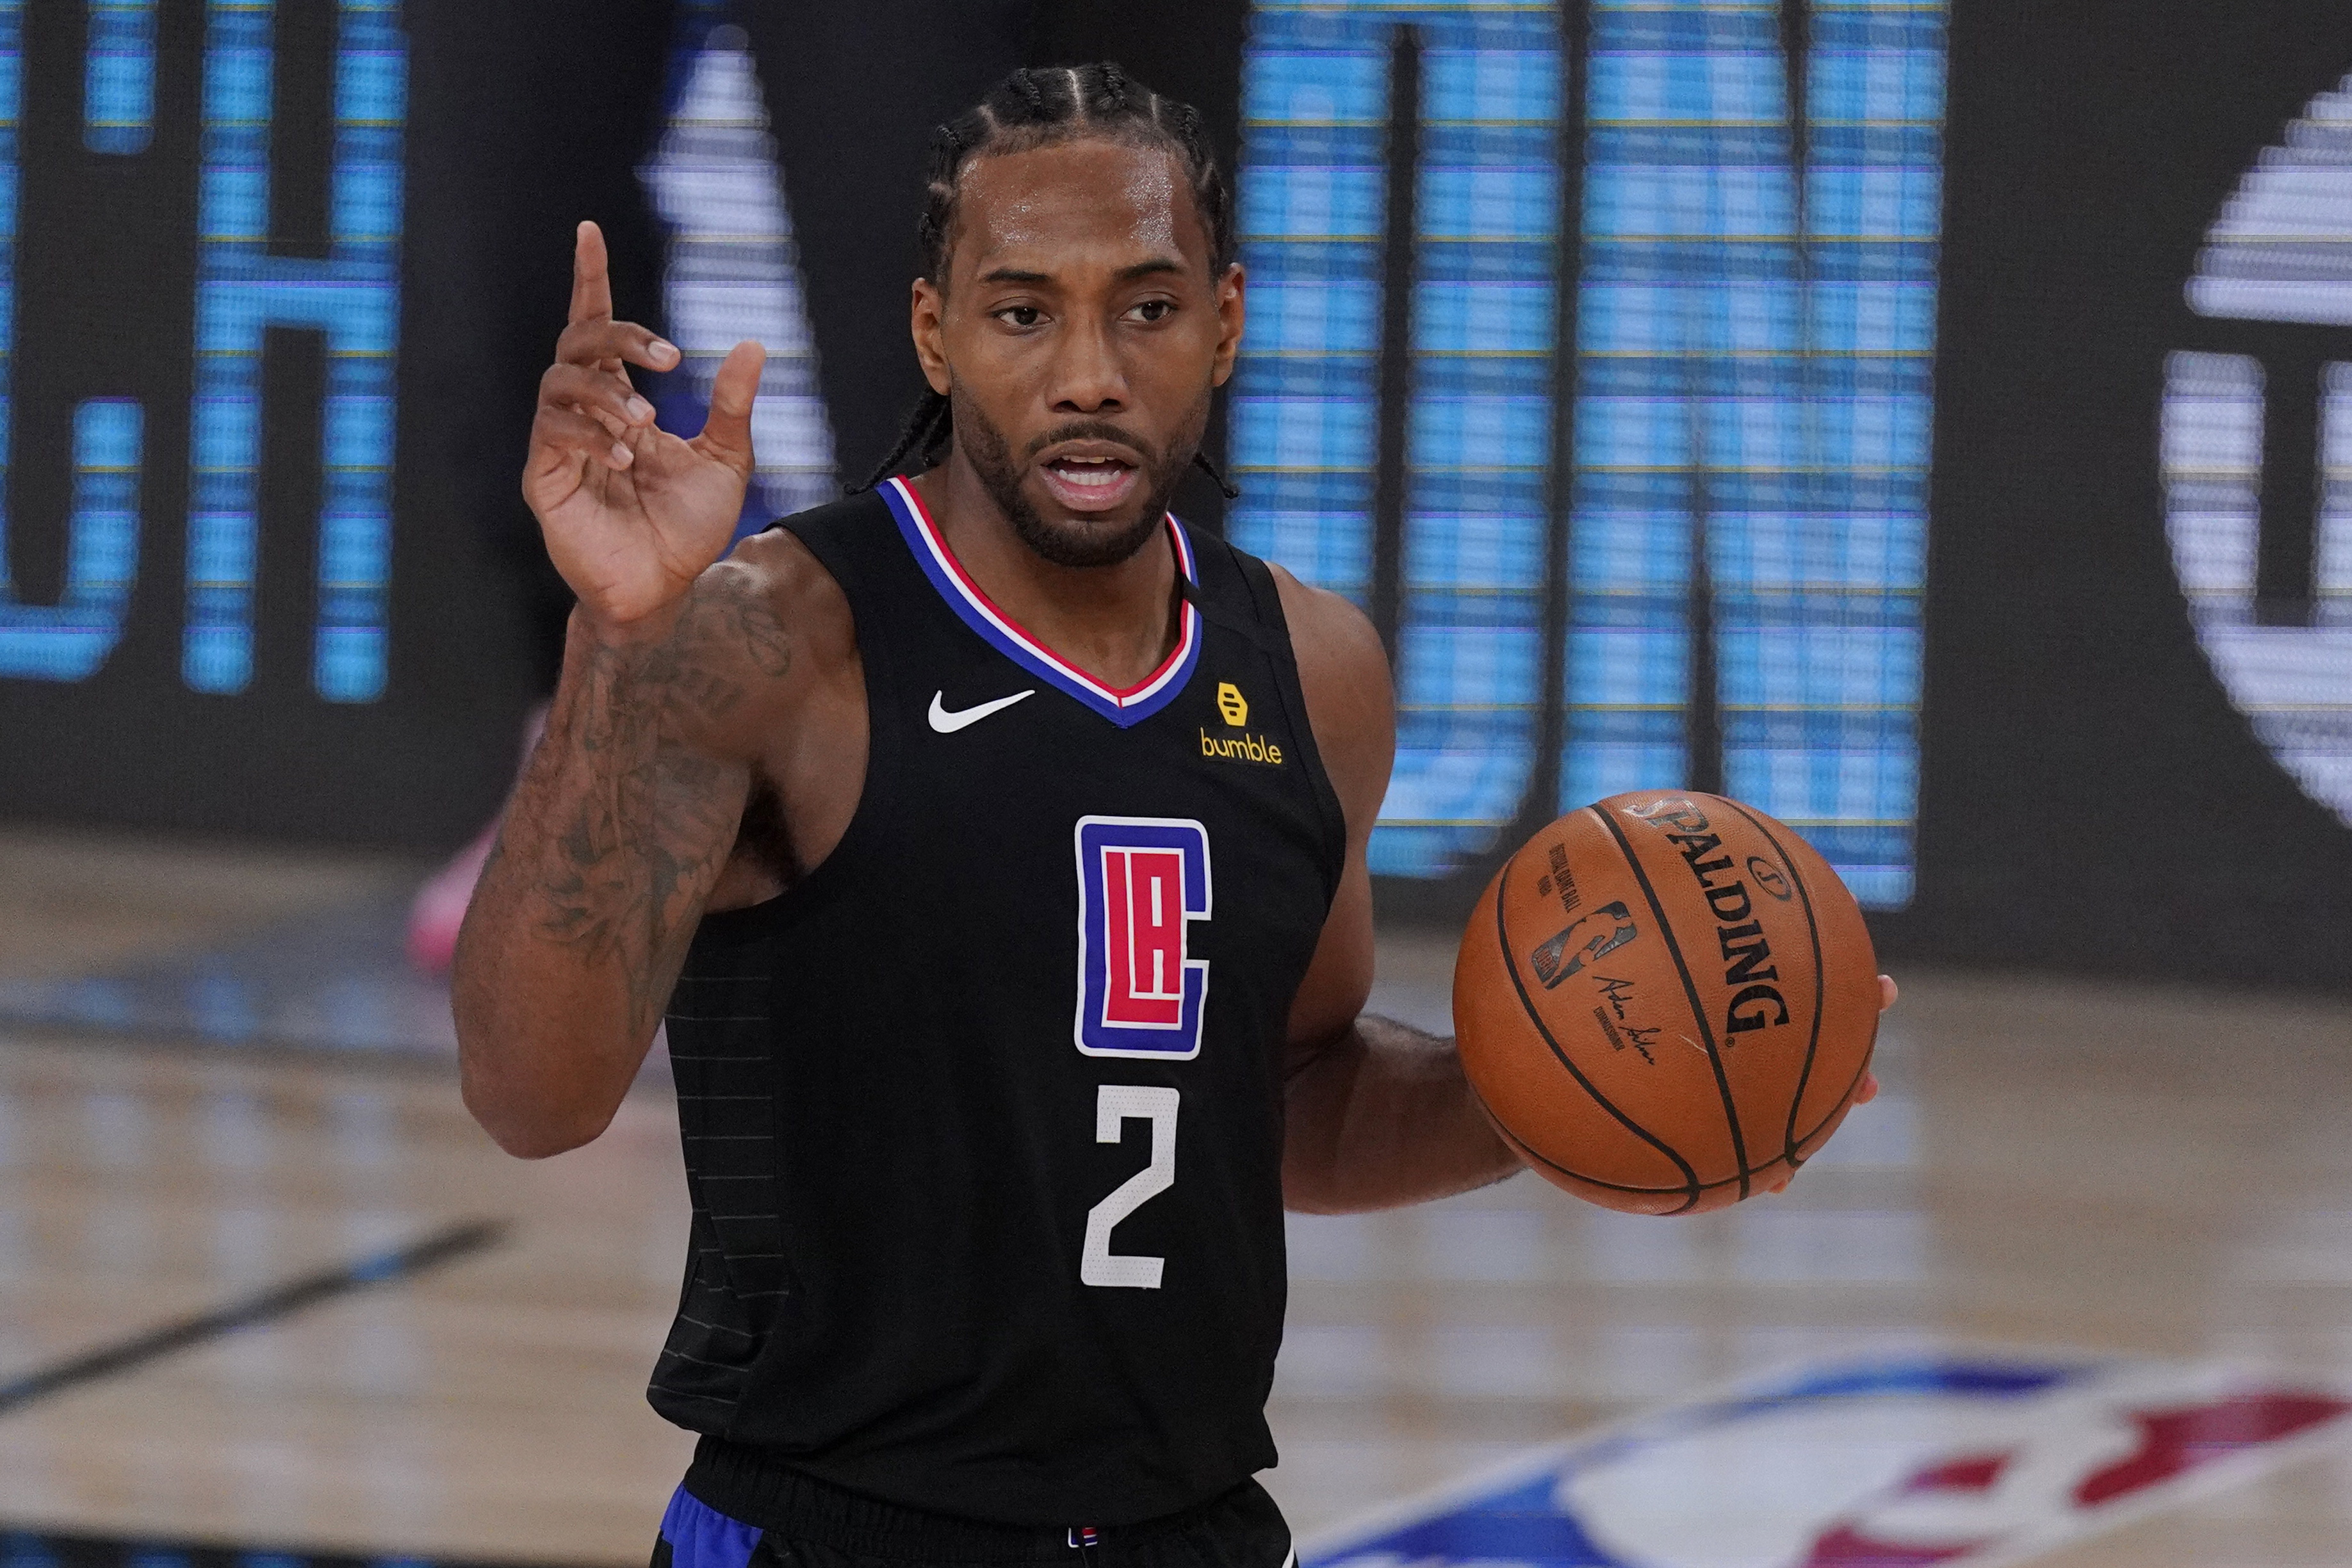 NBA Playoffs TV Schedule (9/5/20) Watch NBA online without cable FREE live streams for Raptors-Celtics, Nuggets-Clippers